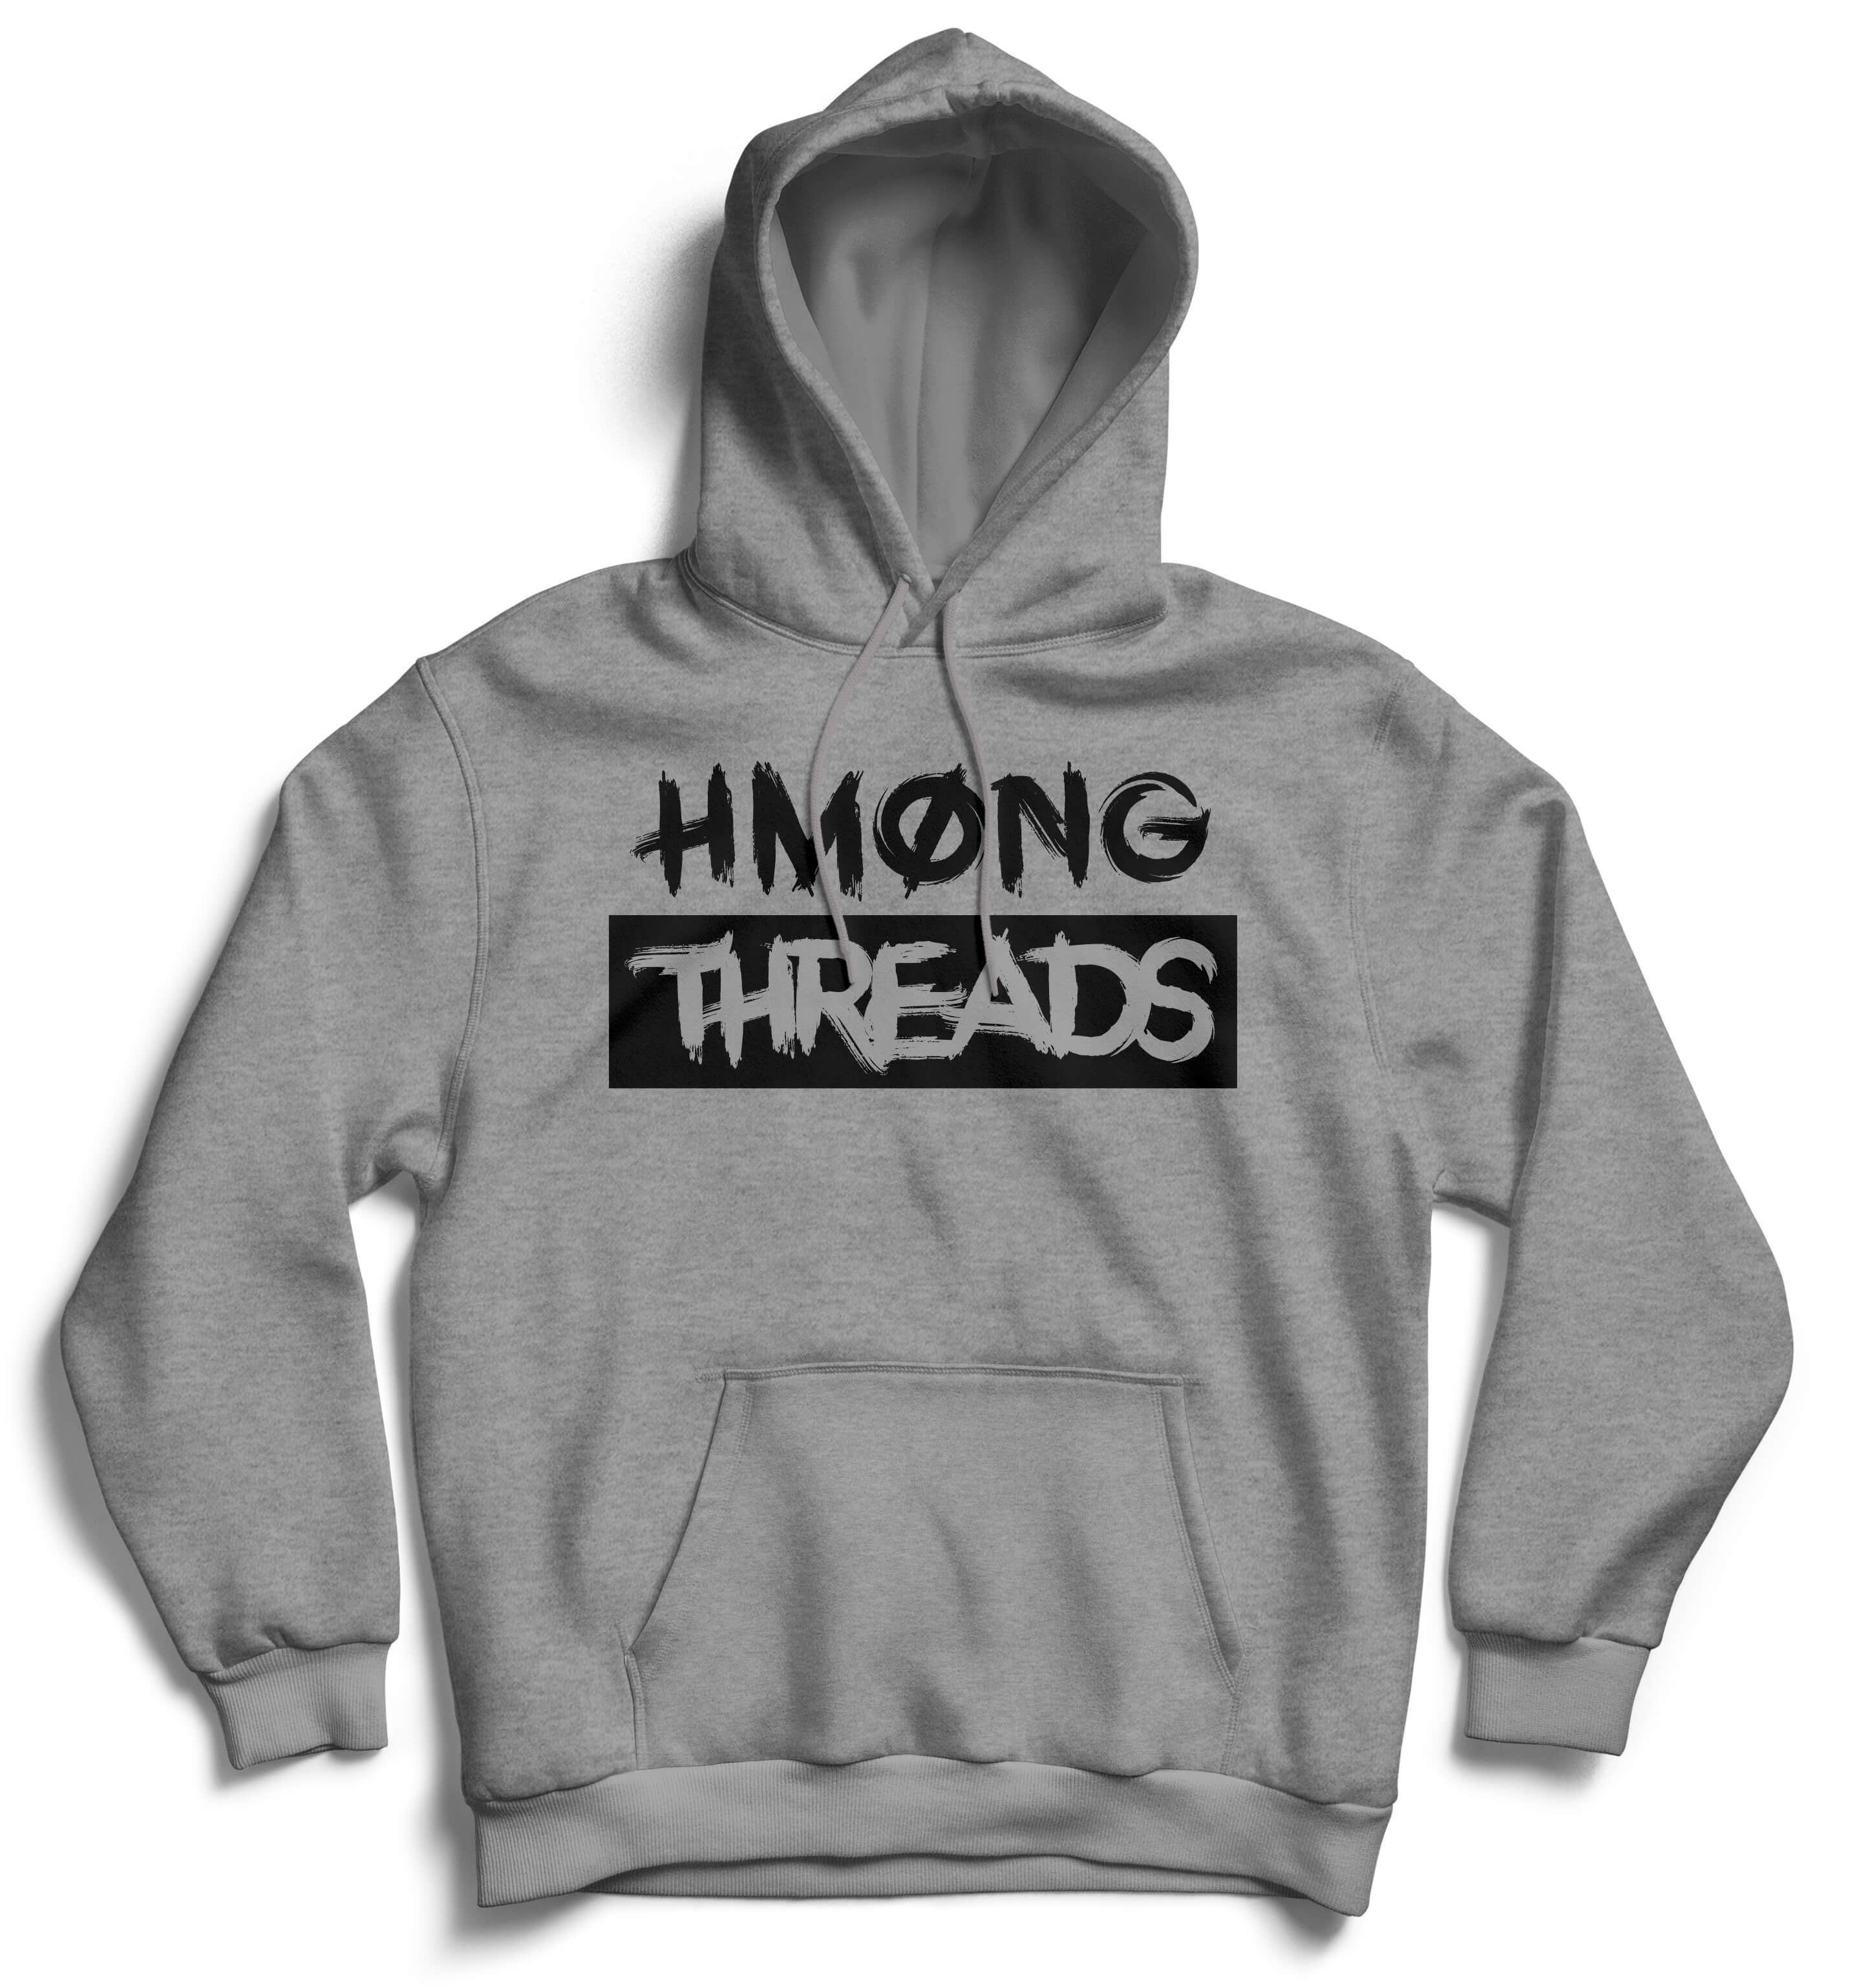 HMONG THREADS BOXED UNISEX HEATHER GREY HOODIE - HMONG THREADS